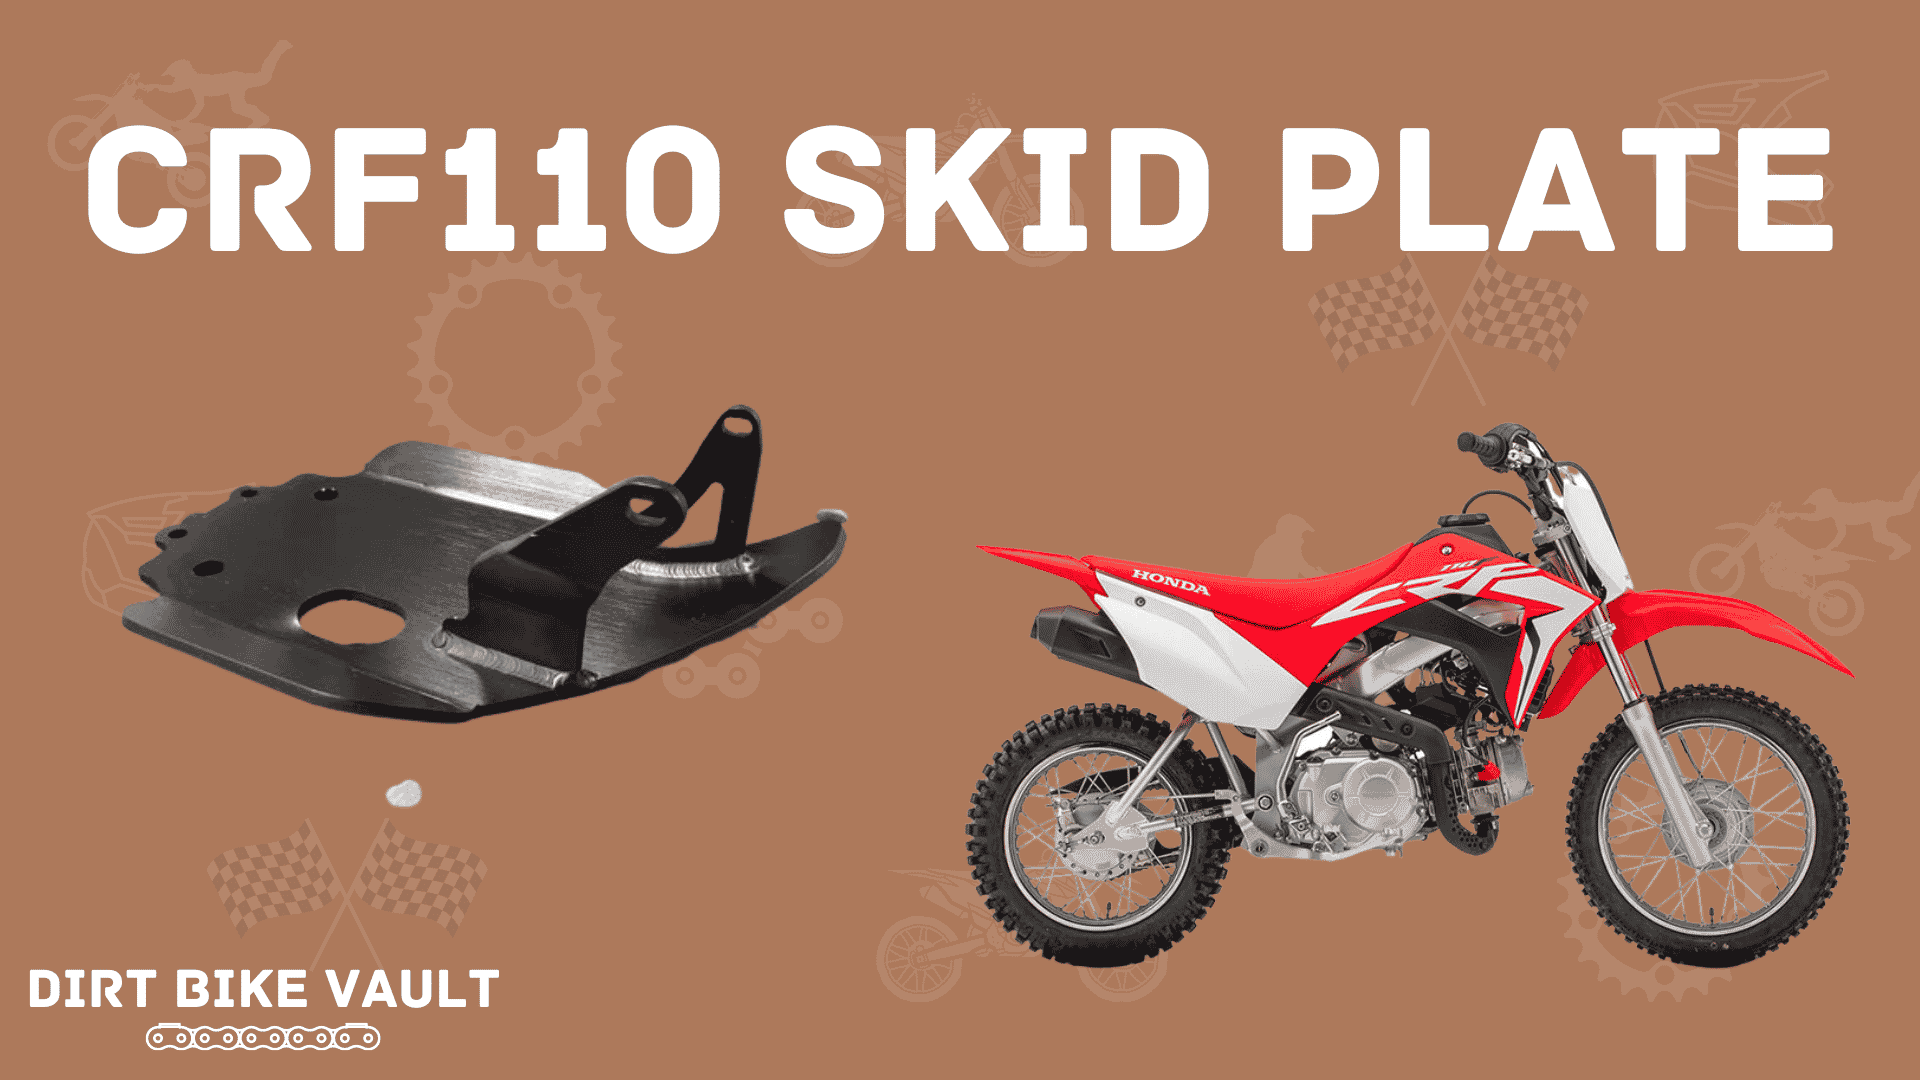 CRF110 skid plate in white text on brown background with crf110 skid plate and crf110 bike images